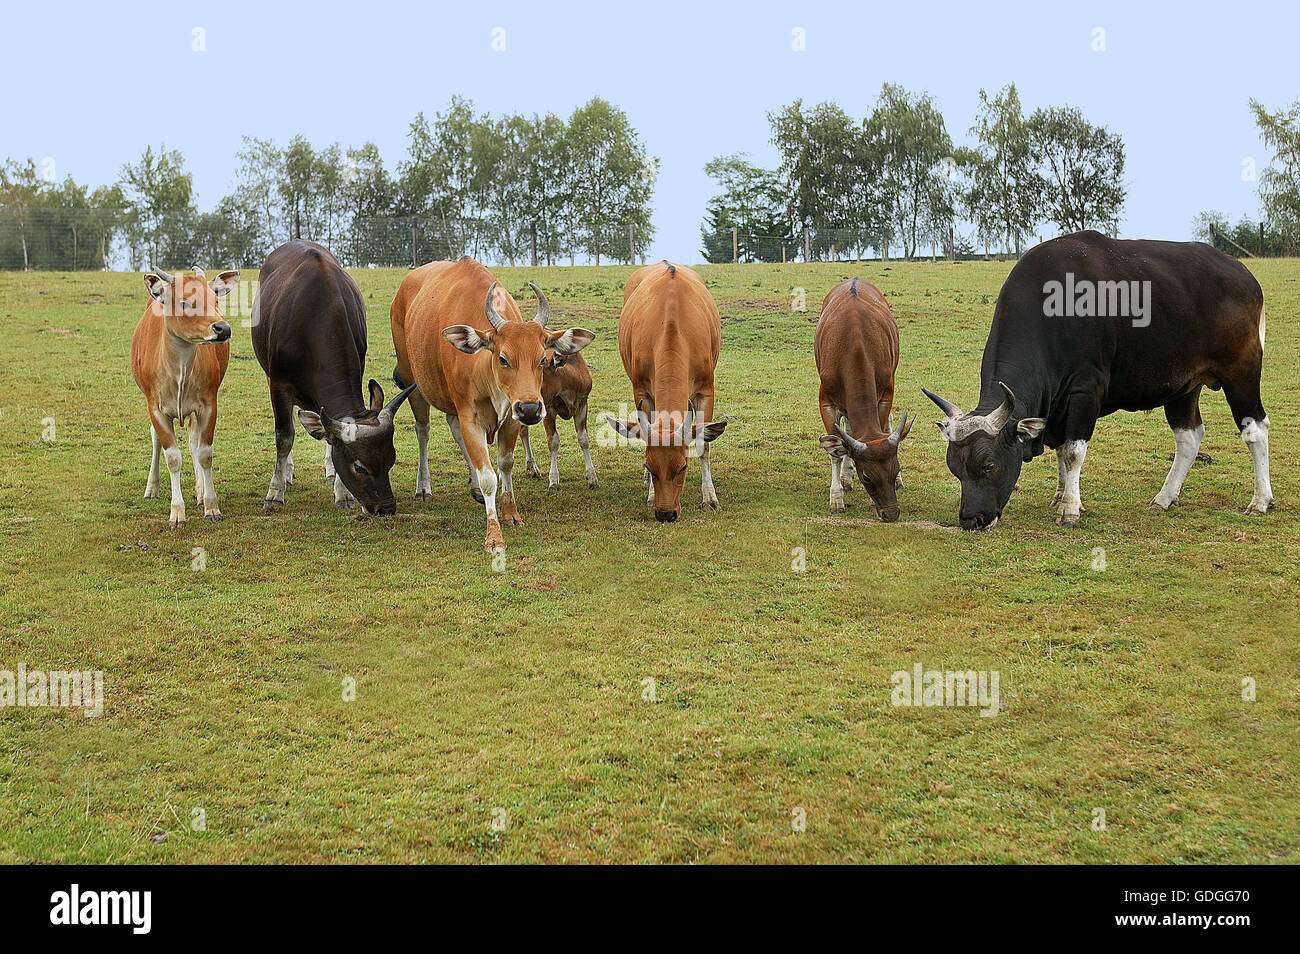 BANTENG bos javanicus, HERD WITH MALES AND FEMALES Stock Photo